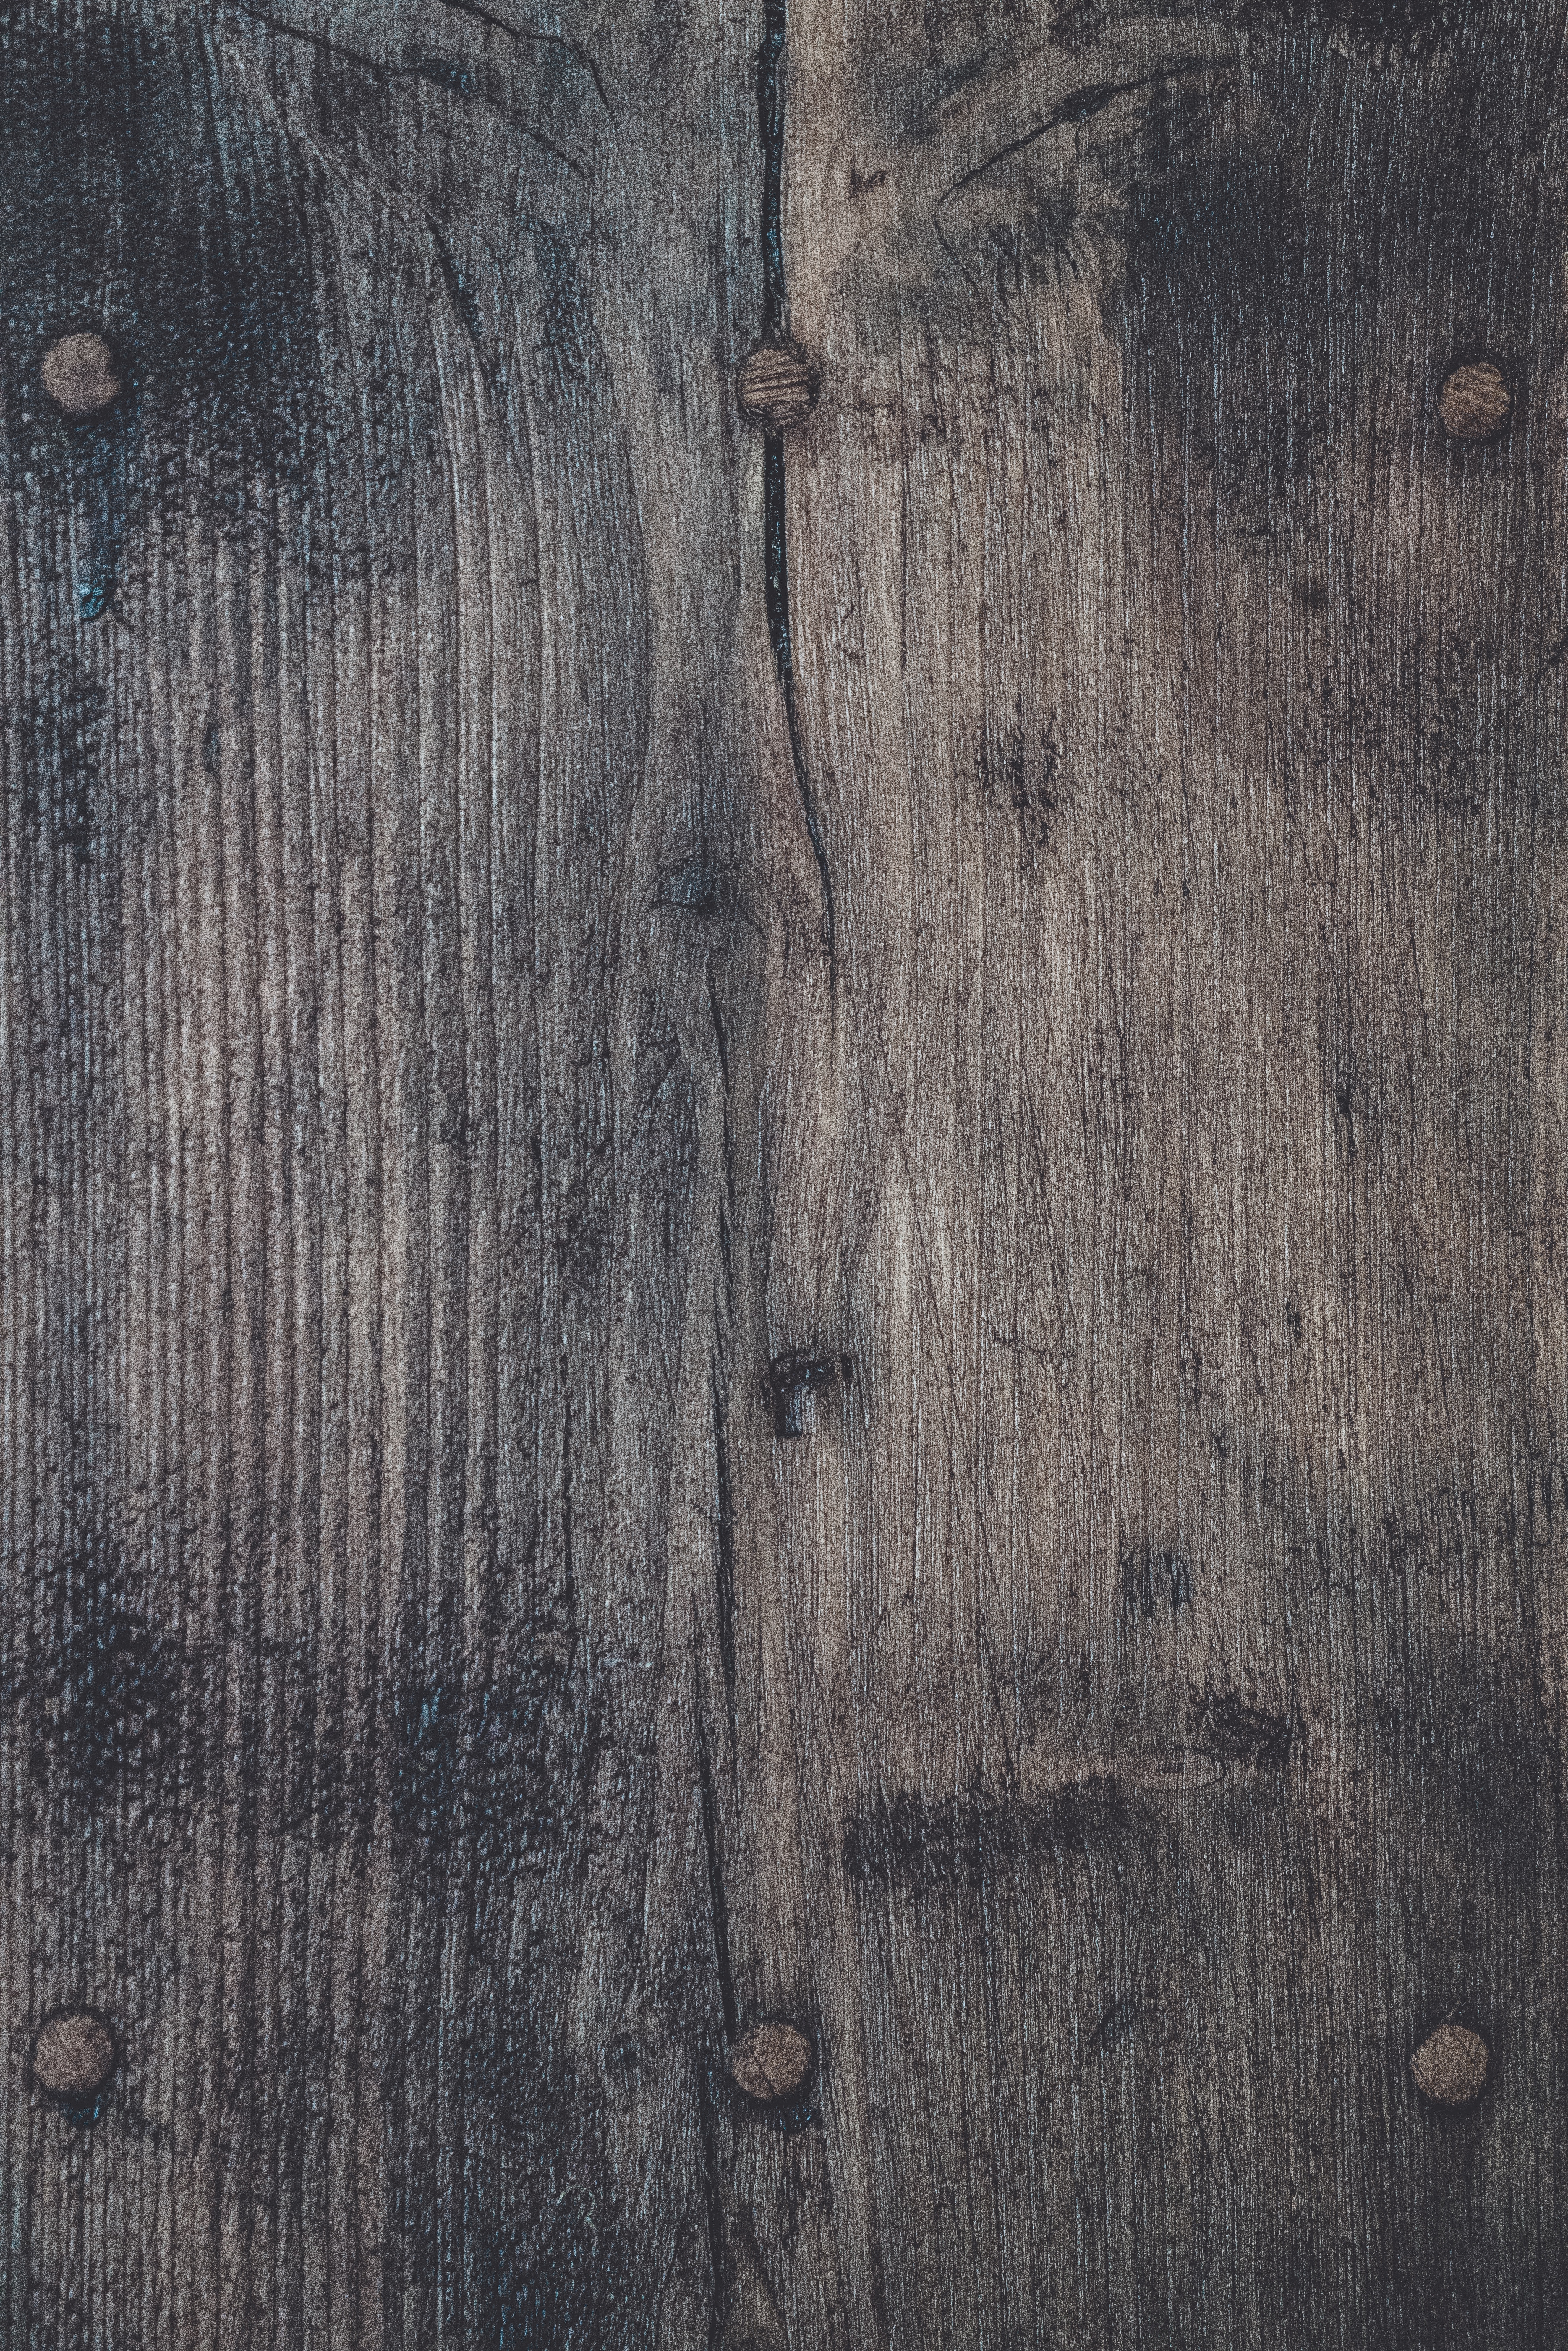 texture, ribbed, textures, surface, wood, wooden UHD